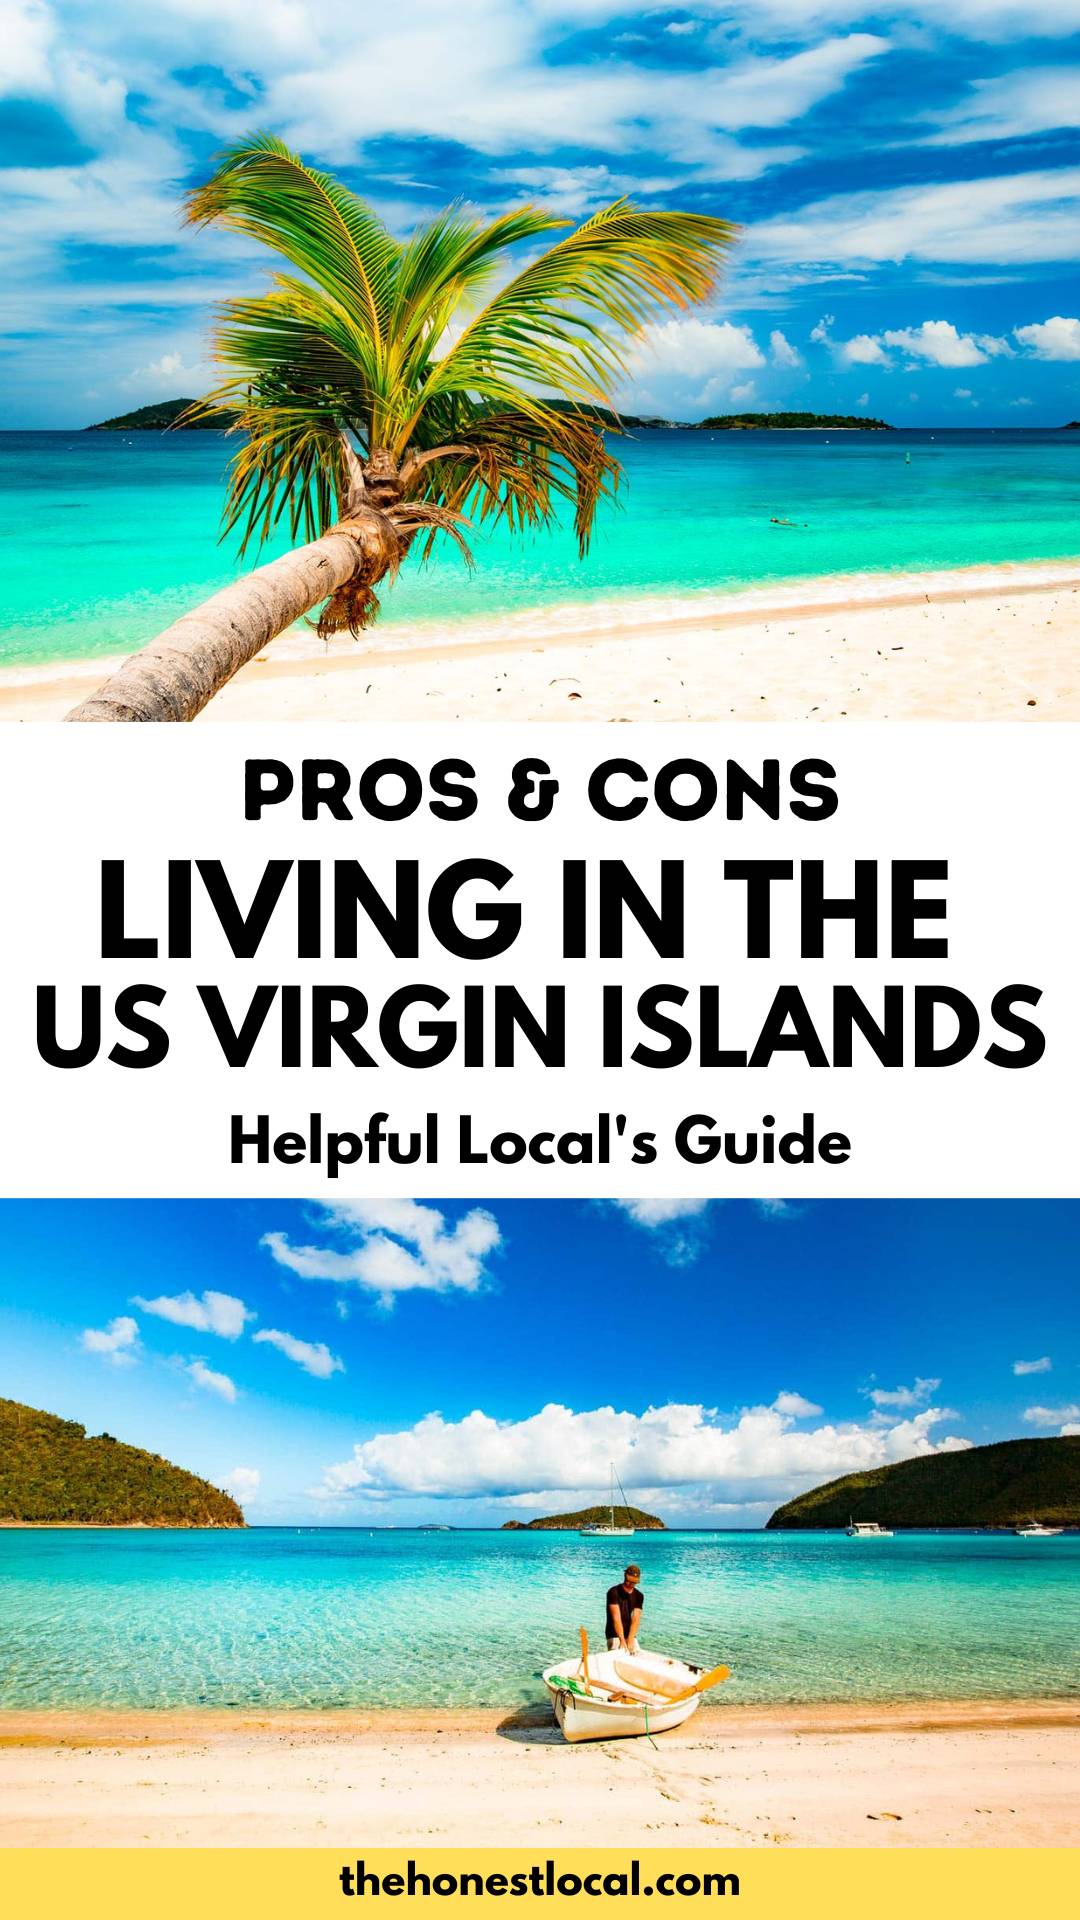 pros and cons of living in the us virgin islands, moving to the us virgin islands